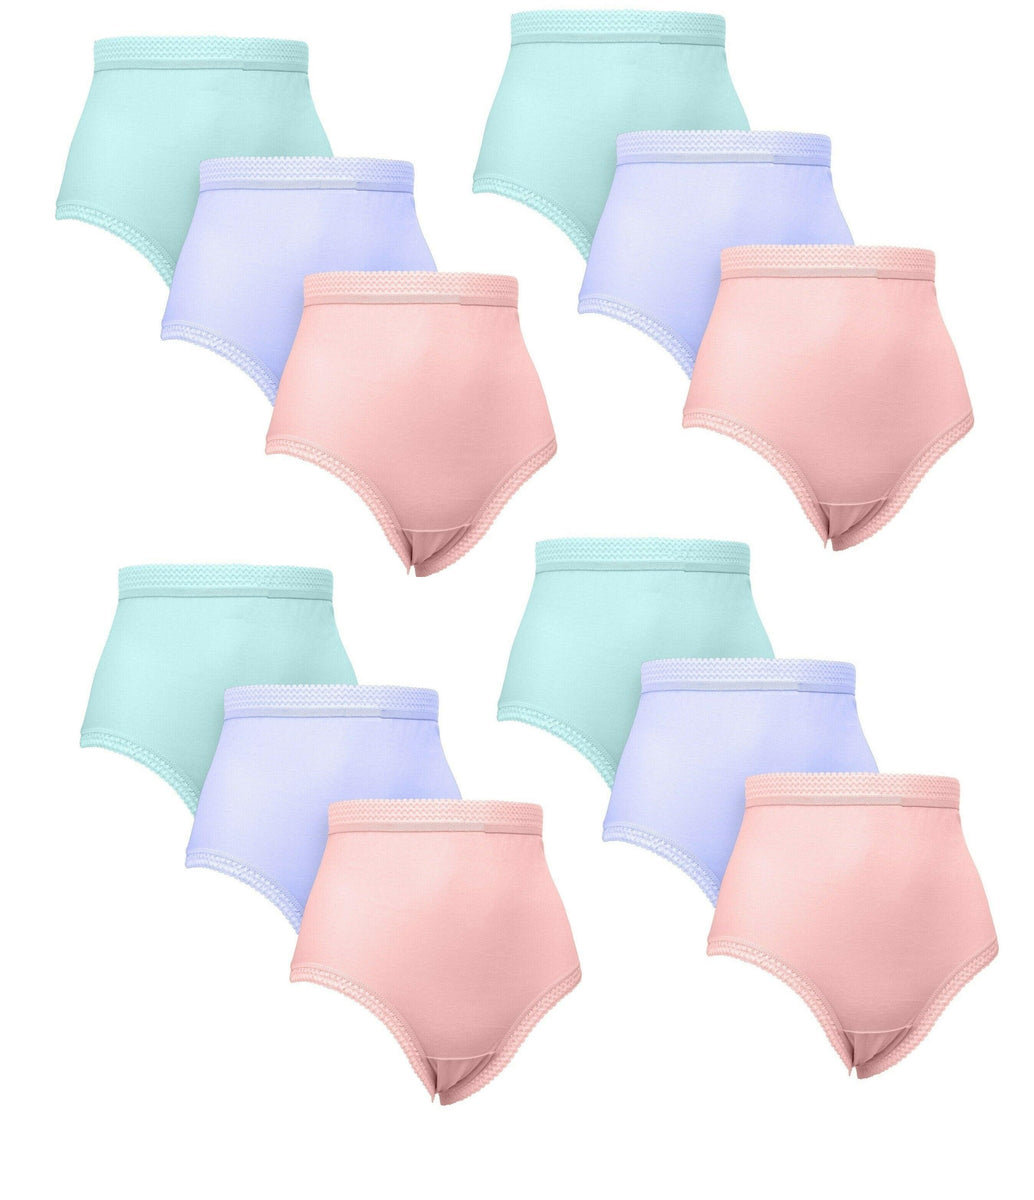 LBECLEY Comfortable Womens Underwear Underpants Patchwork Color